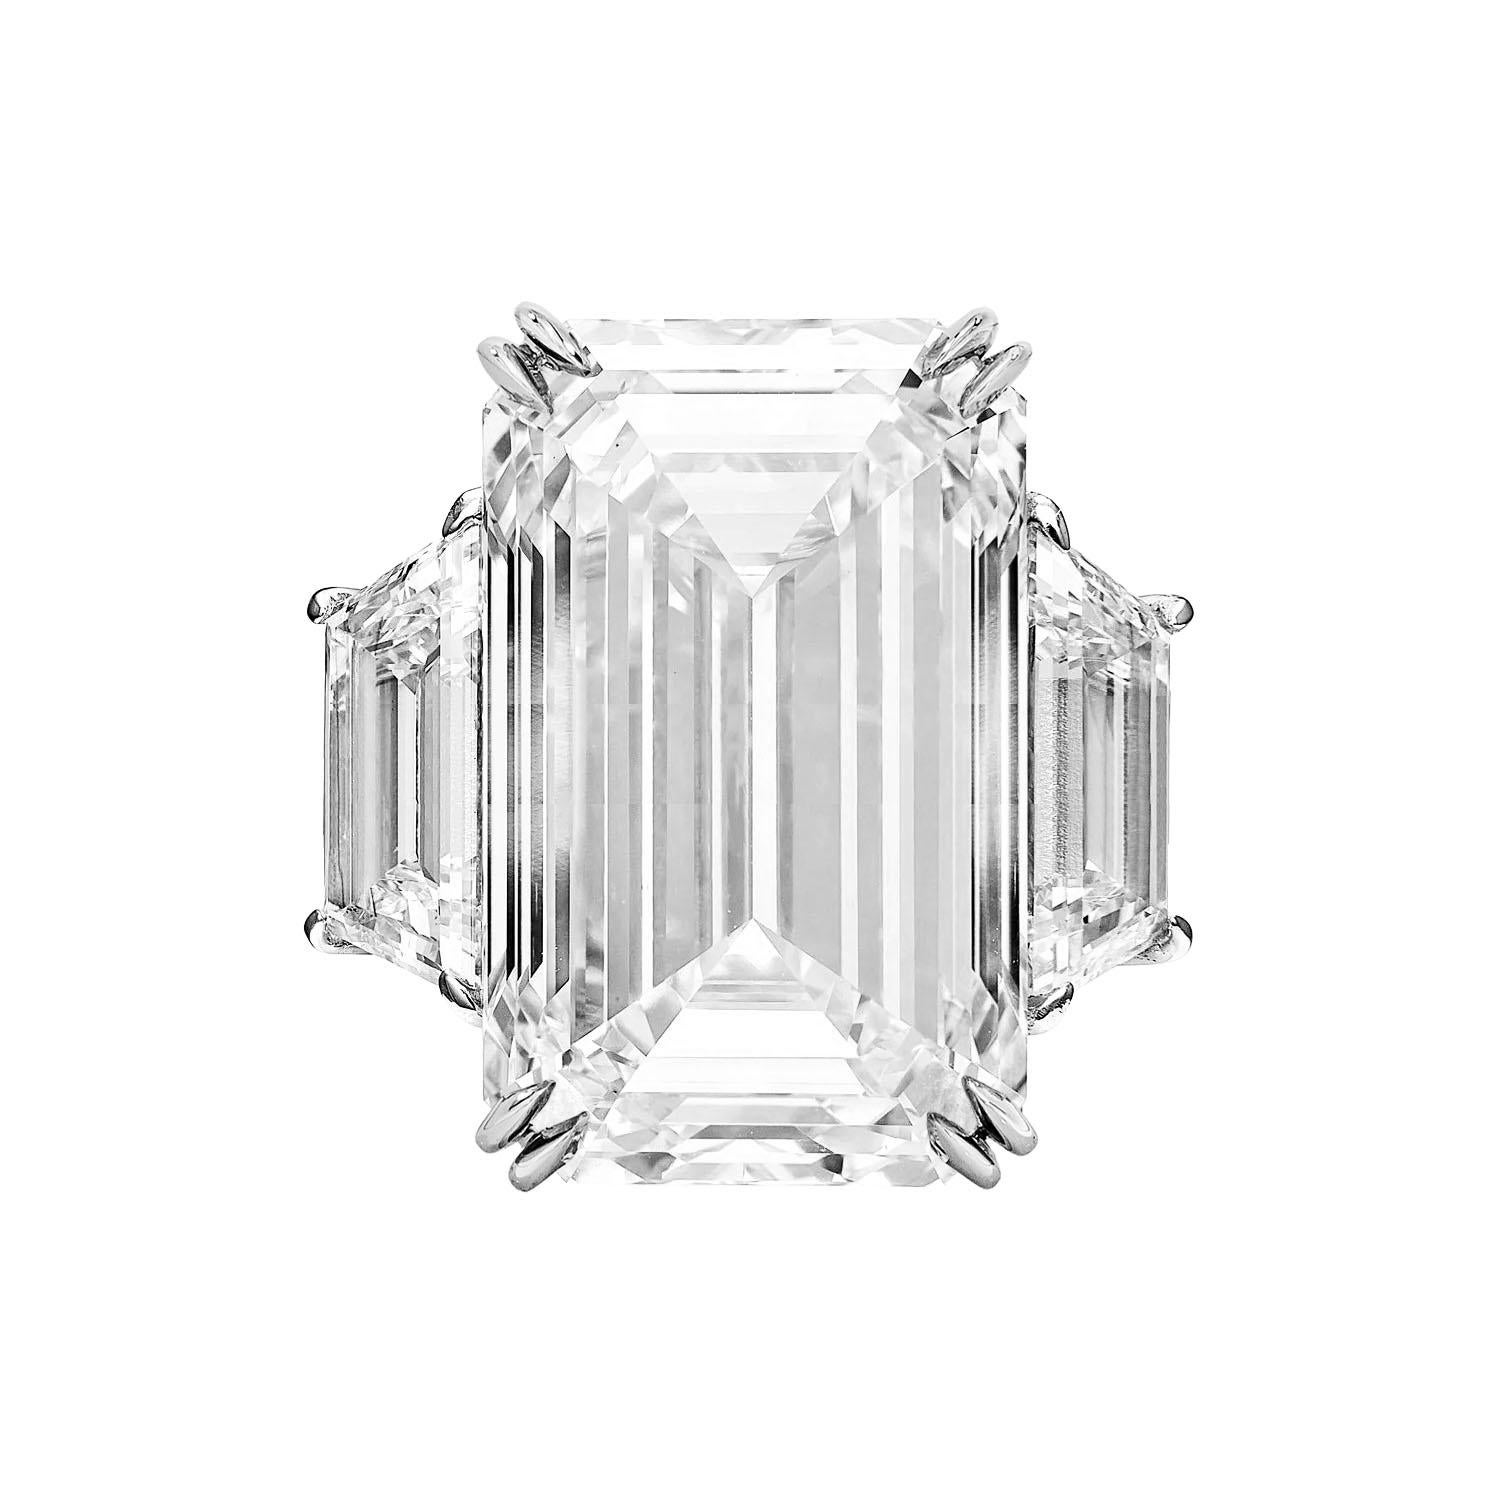 Contemporary GIA Certified 9.03 Carat Emerald Cut Diamond Ring with Trapezoid Diamond on side For Sale